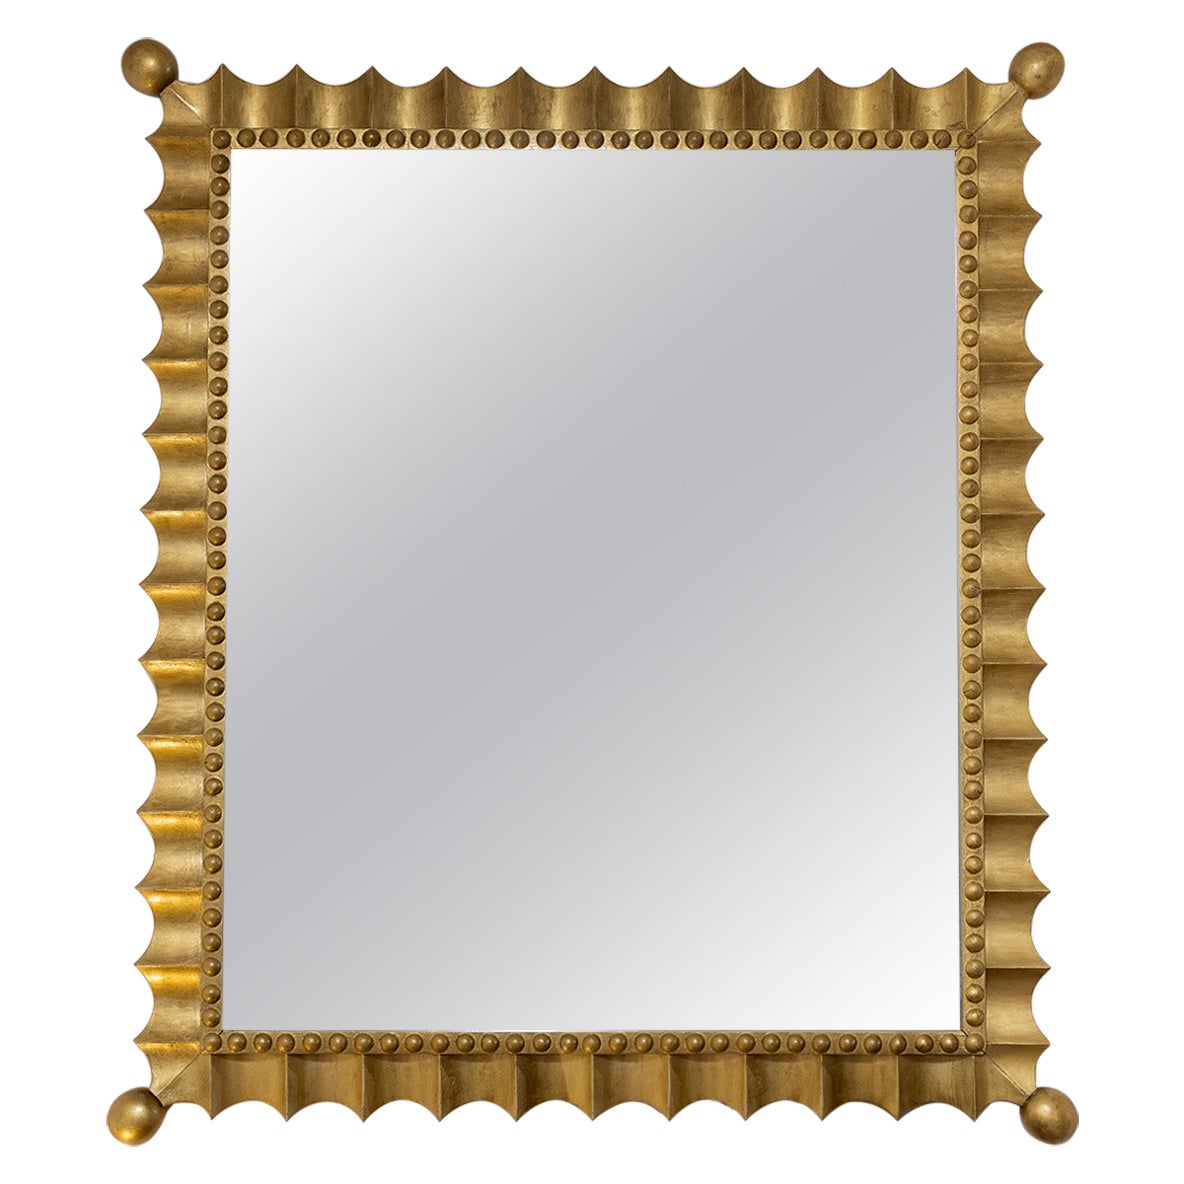 Gold-patinated Scalloped Wall Mirror, Mid-20th Century